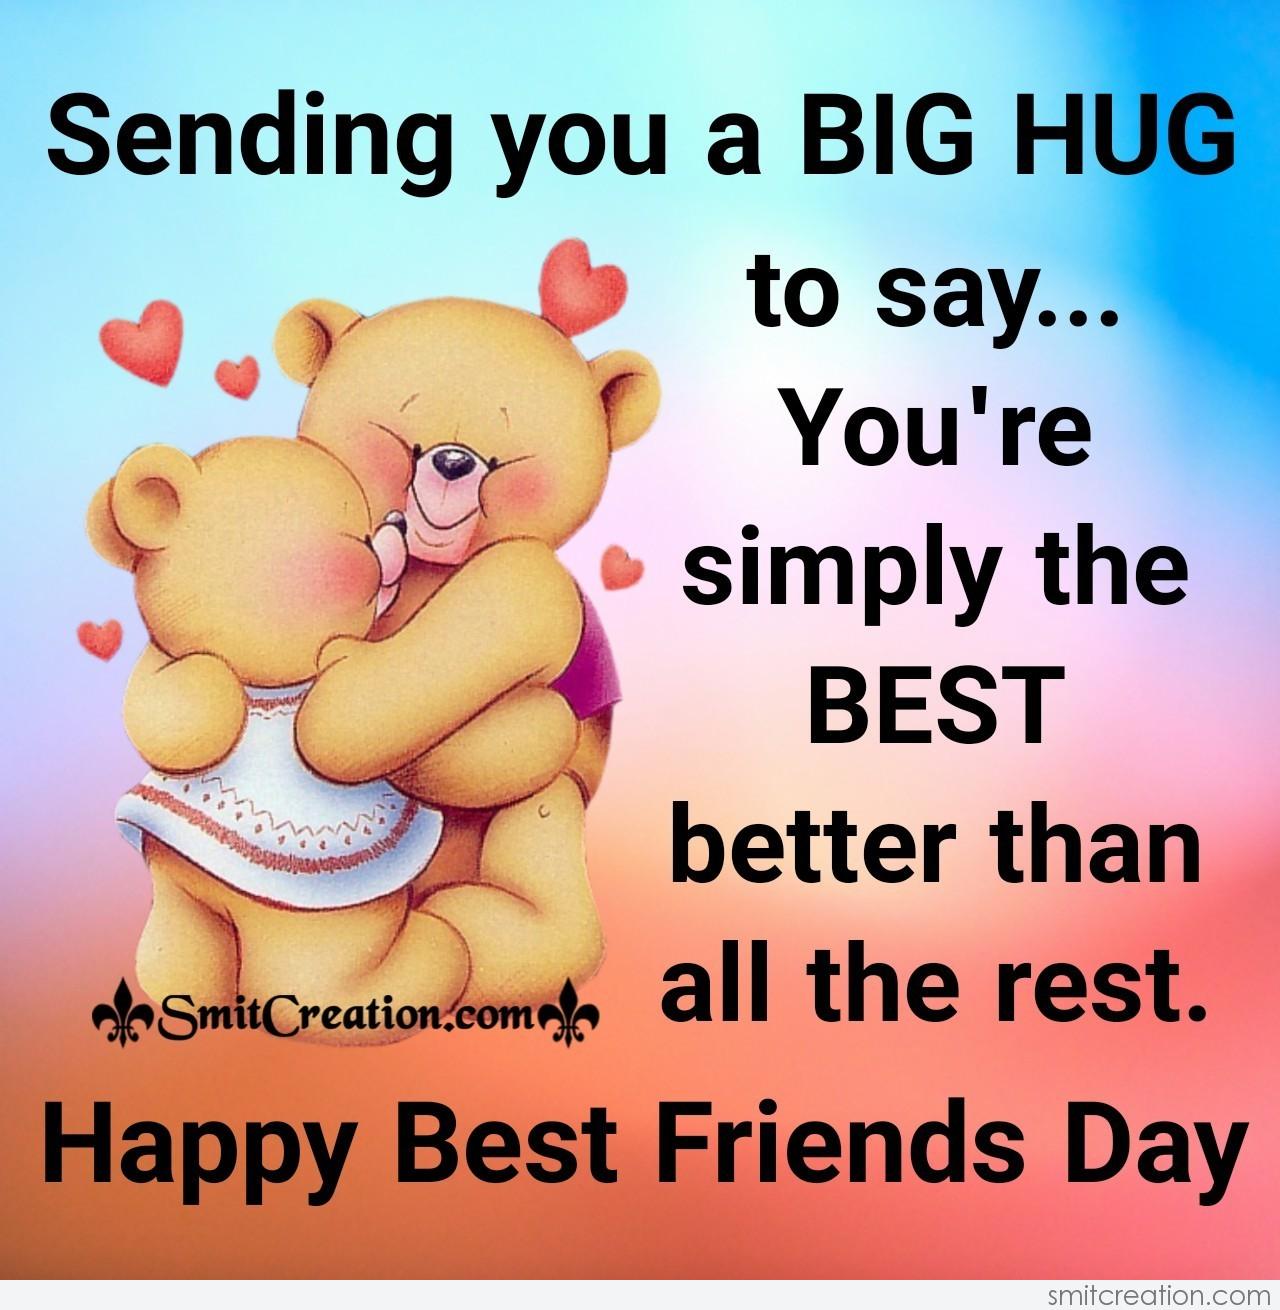 Sending Big Hugs On Best Friends Day Smitcreation Com Pictures And Graphics